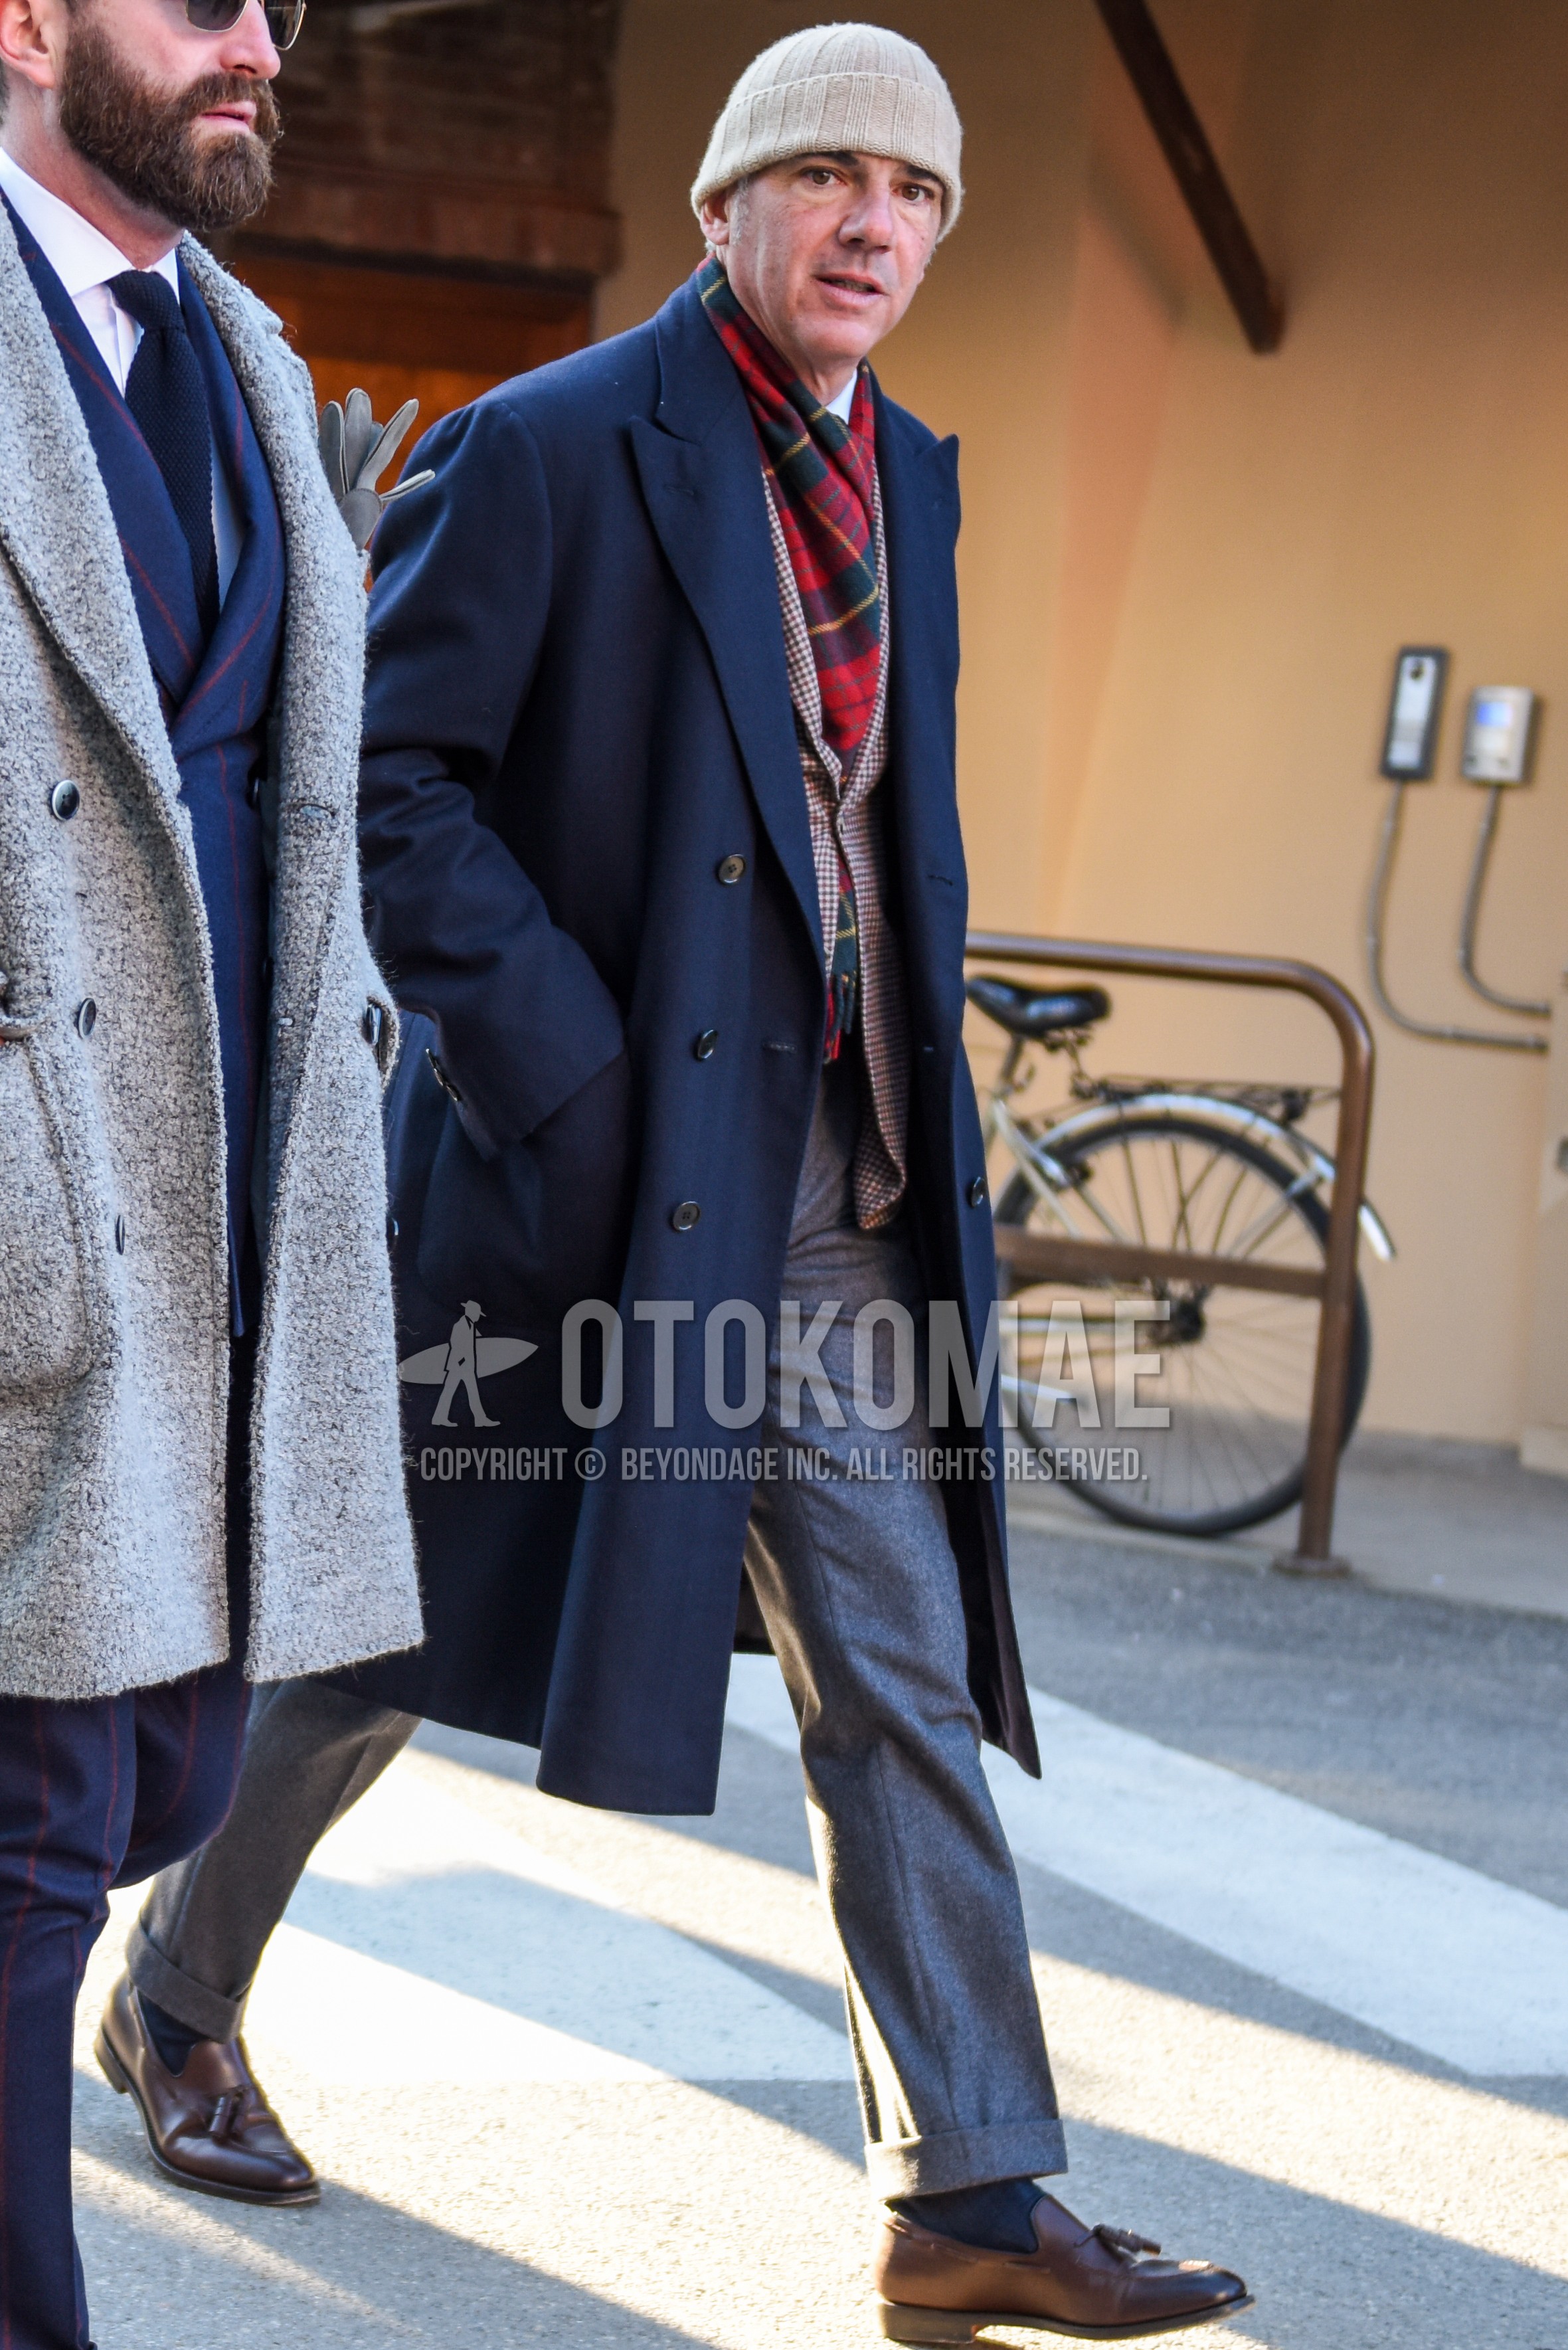 Men's autumn winter outfit with beige plain knit cap, red black check scarf, navy plain chester coat, brown check tailored jacket, gray plain slacks, gray plain ankle pants, dark gray plain socks, brown tassel loafers leather shoes.